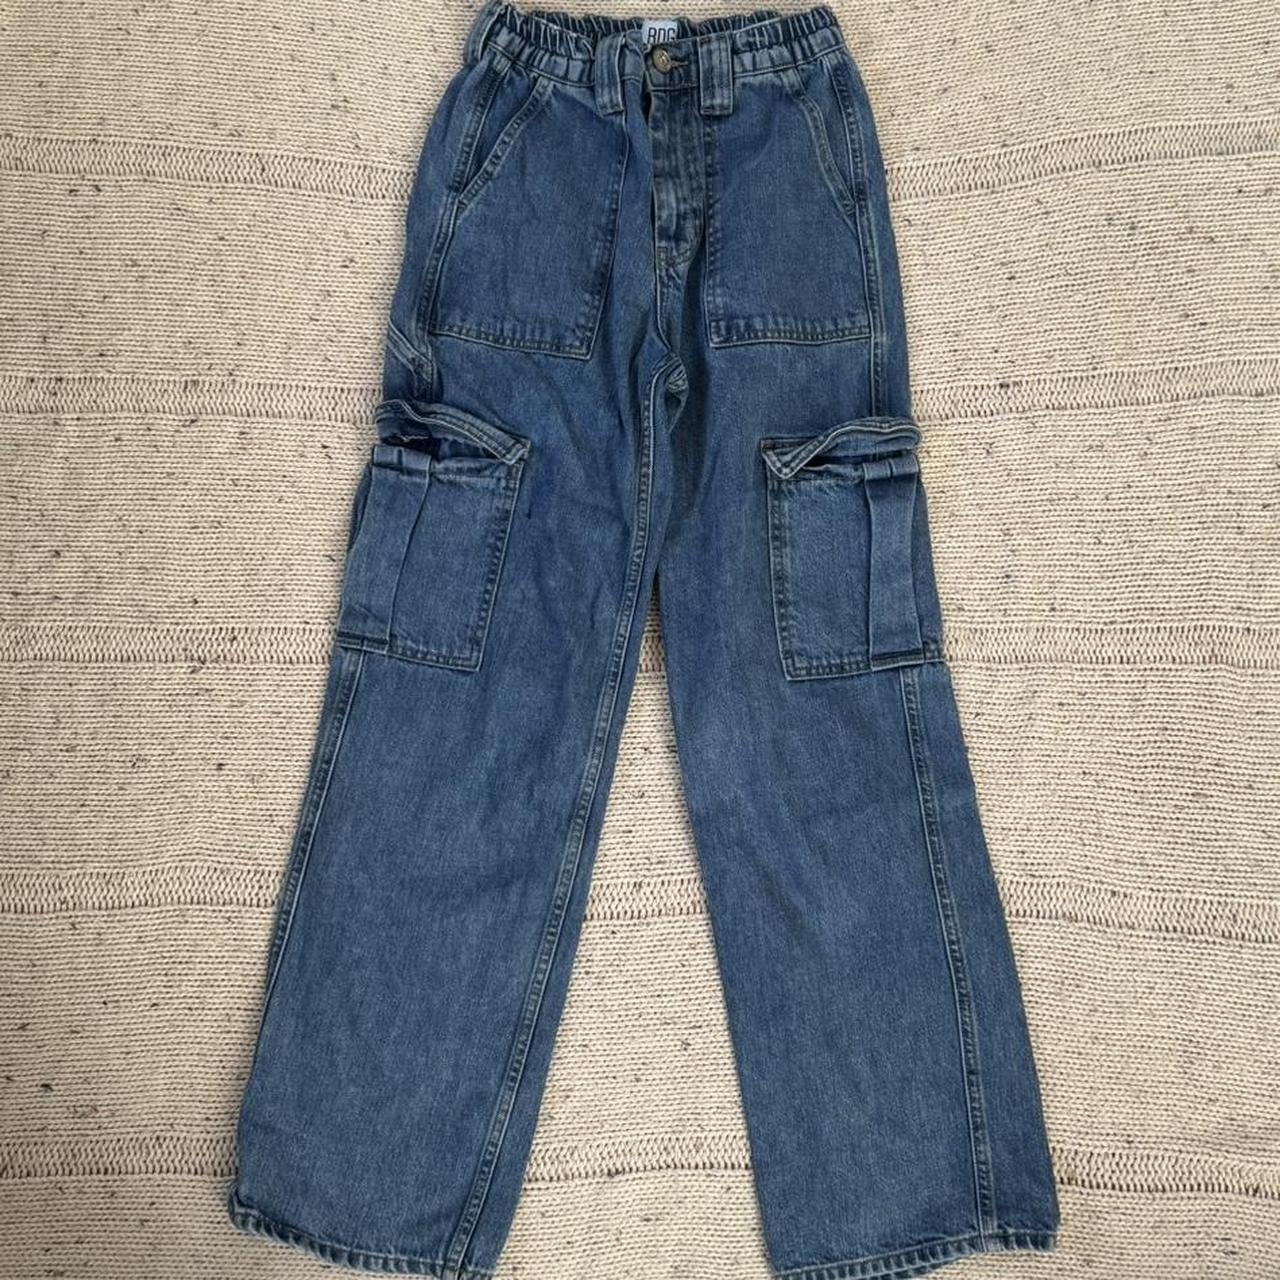 BDG jeans “elastic” waist and cargo style lightly... - Depop